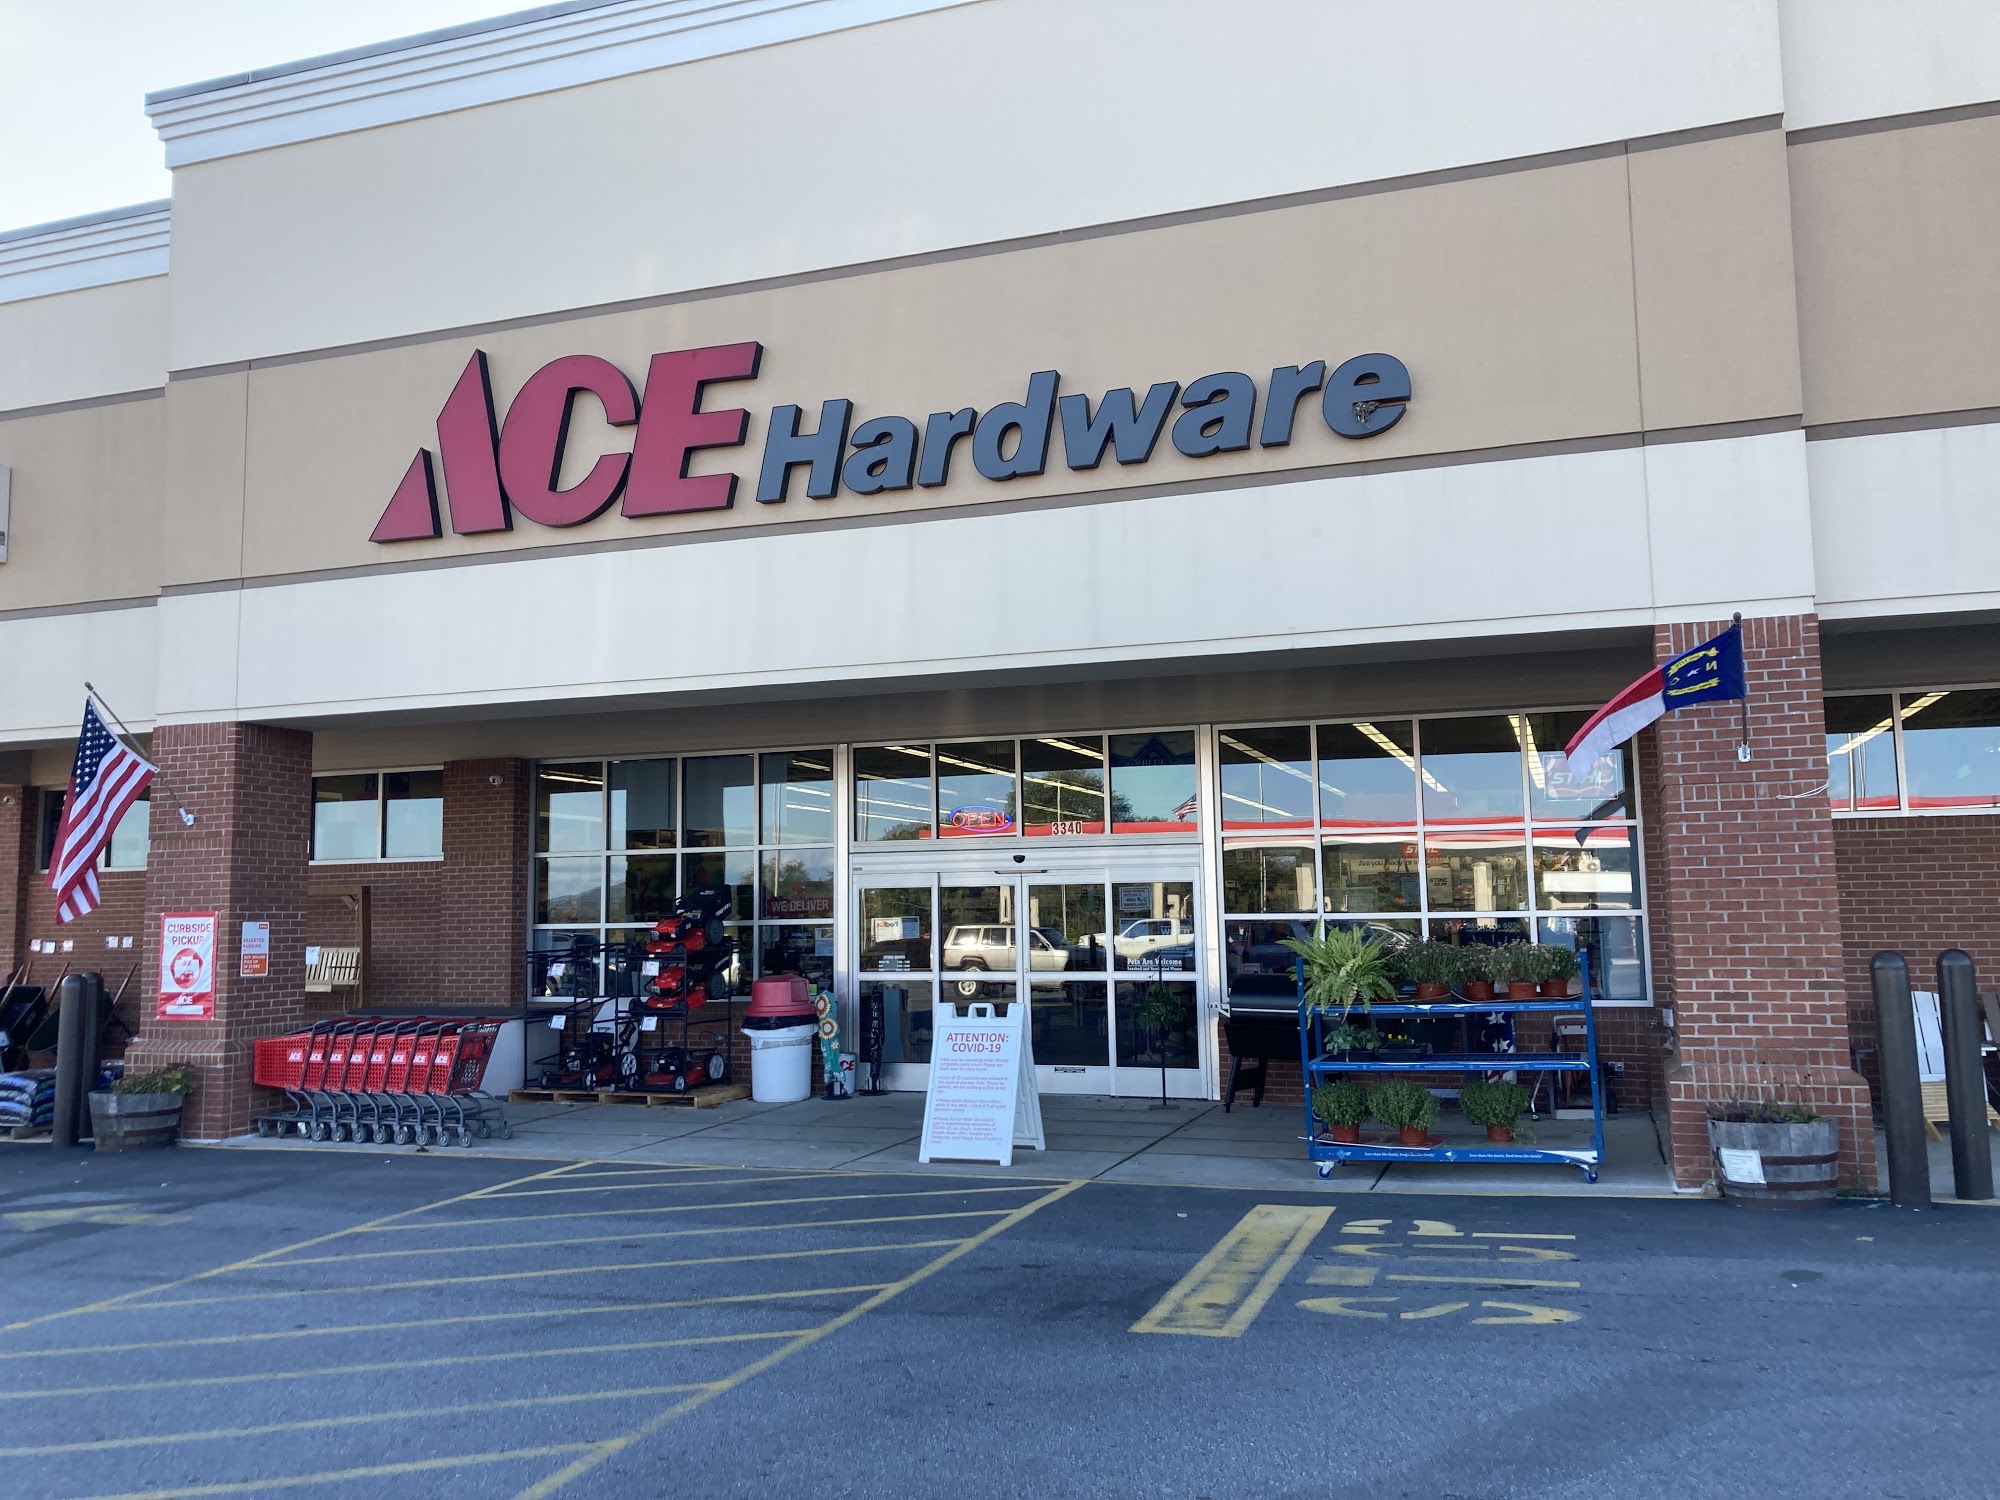 Young Ace Hardware